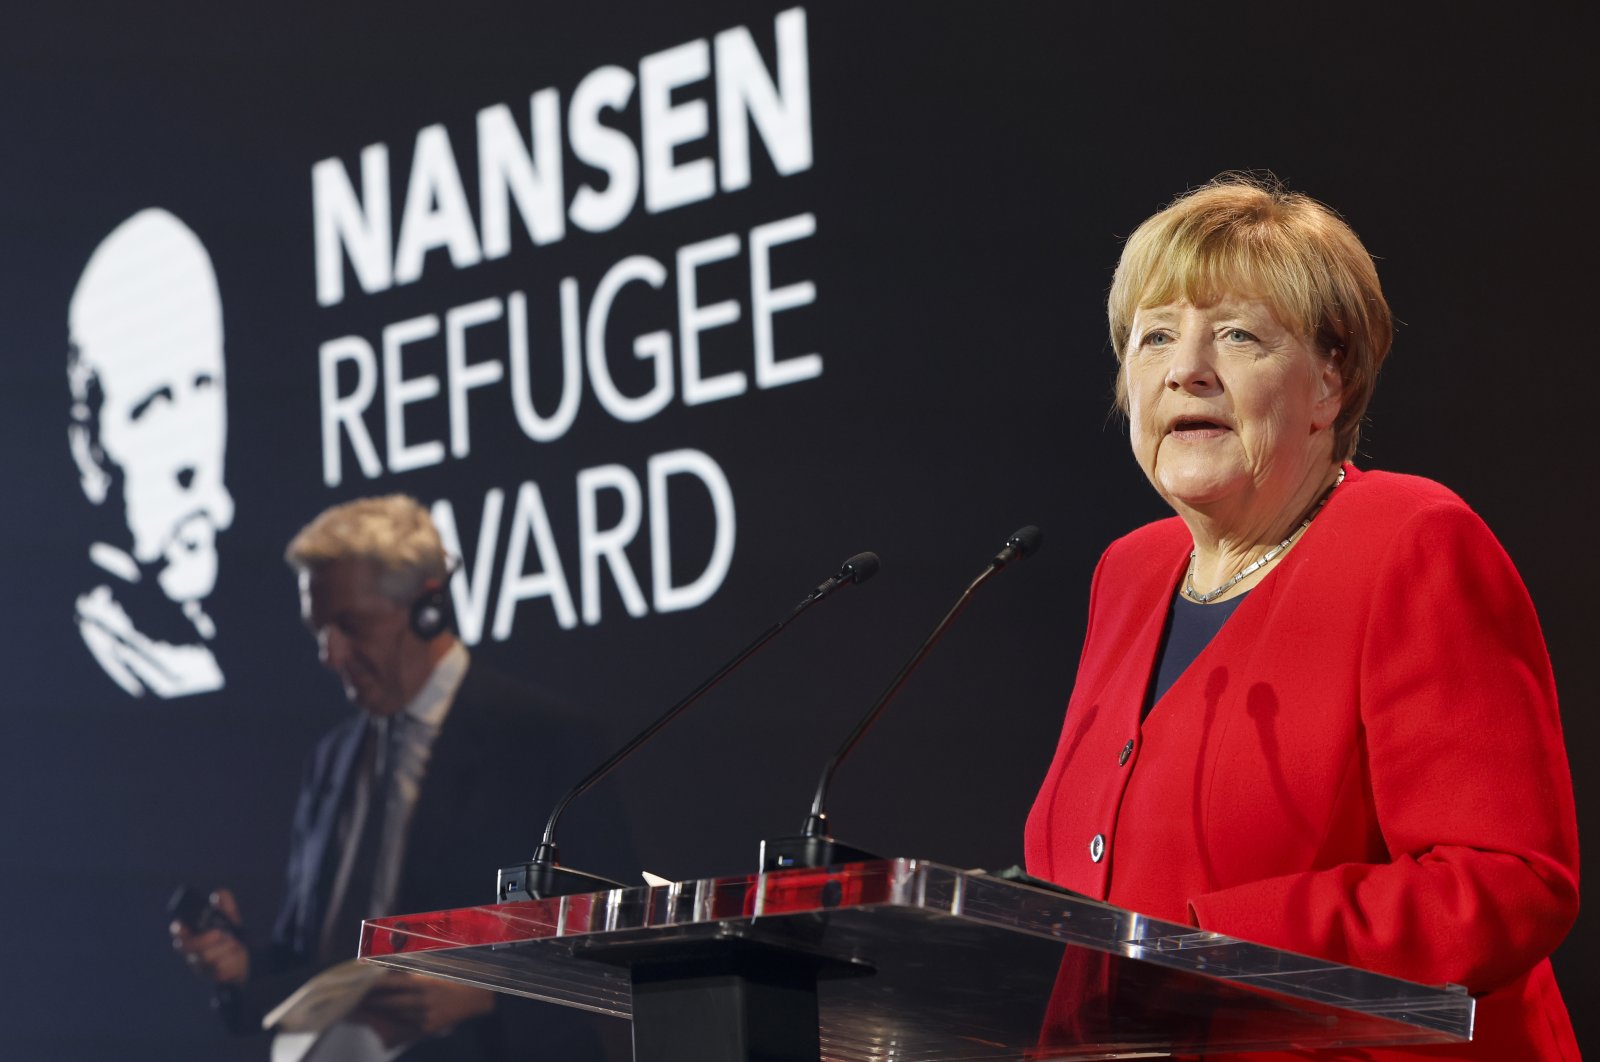 Former Chancellor of Germany Angela Merkel speaks upon receiving the United Nations High Commissioner for Refugees (UNHCR) Nansen Refugee Award for protecting refugees at the height of the Syria crisis during a ceremony in Geneva, Switzerland, Oct. 10, 2022.  (EPA Photo)